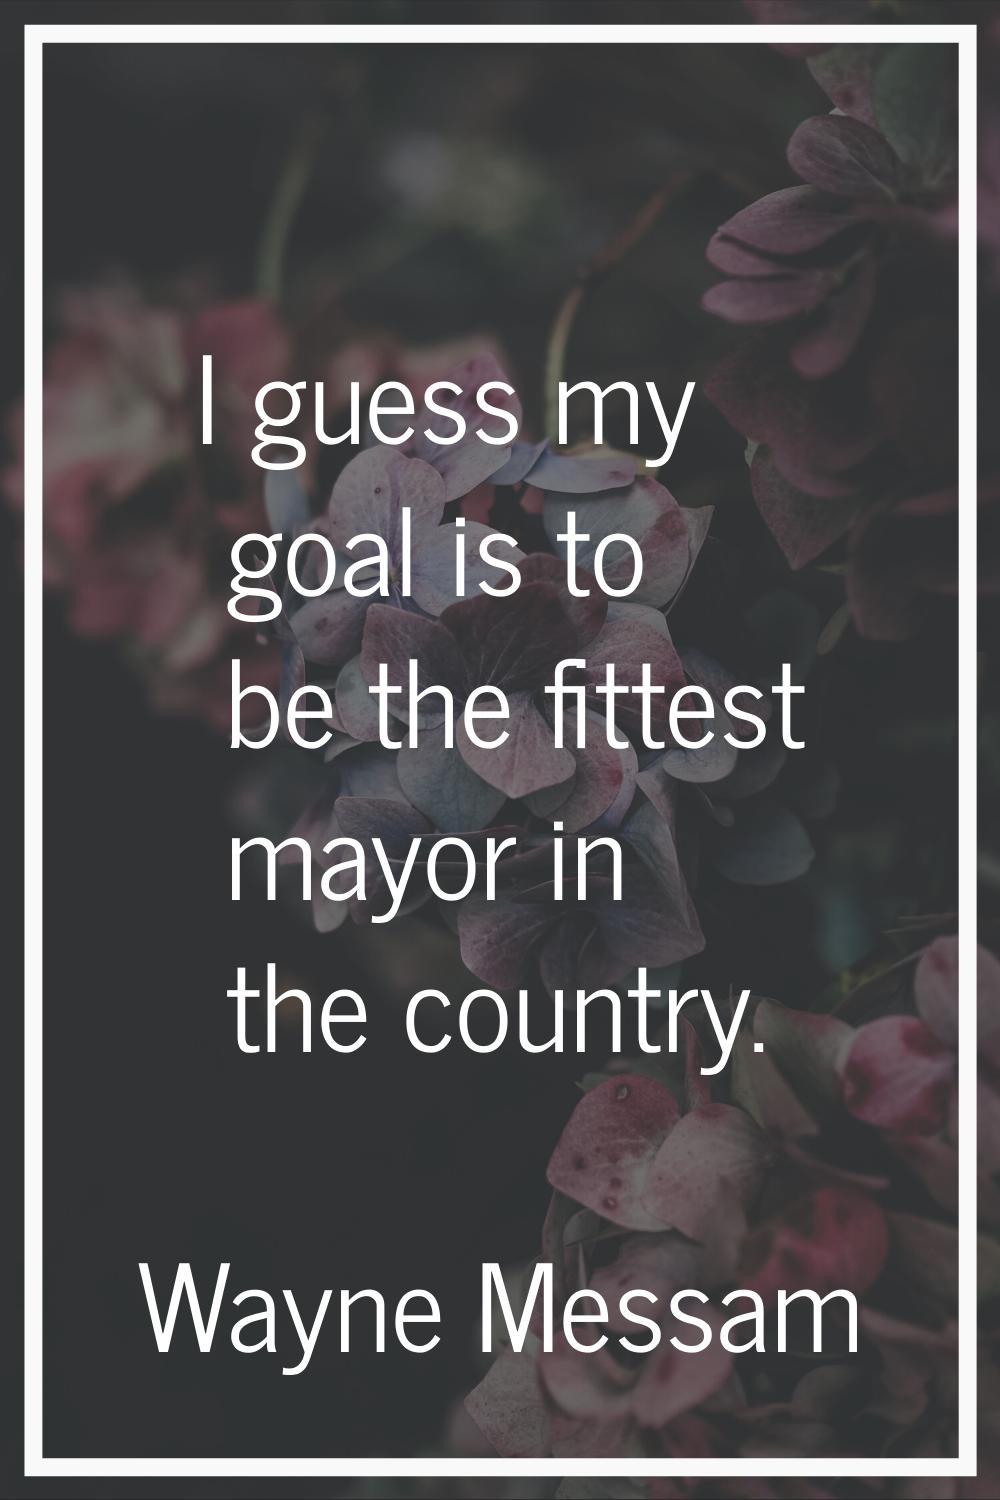 I guess my goal is to be the fittest mayor in the country.